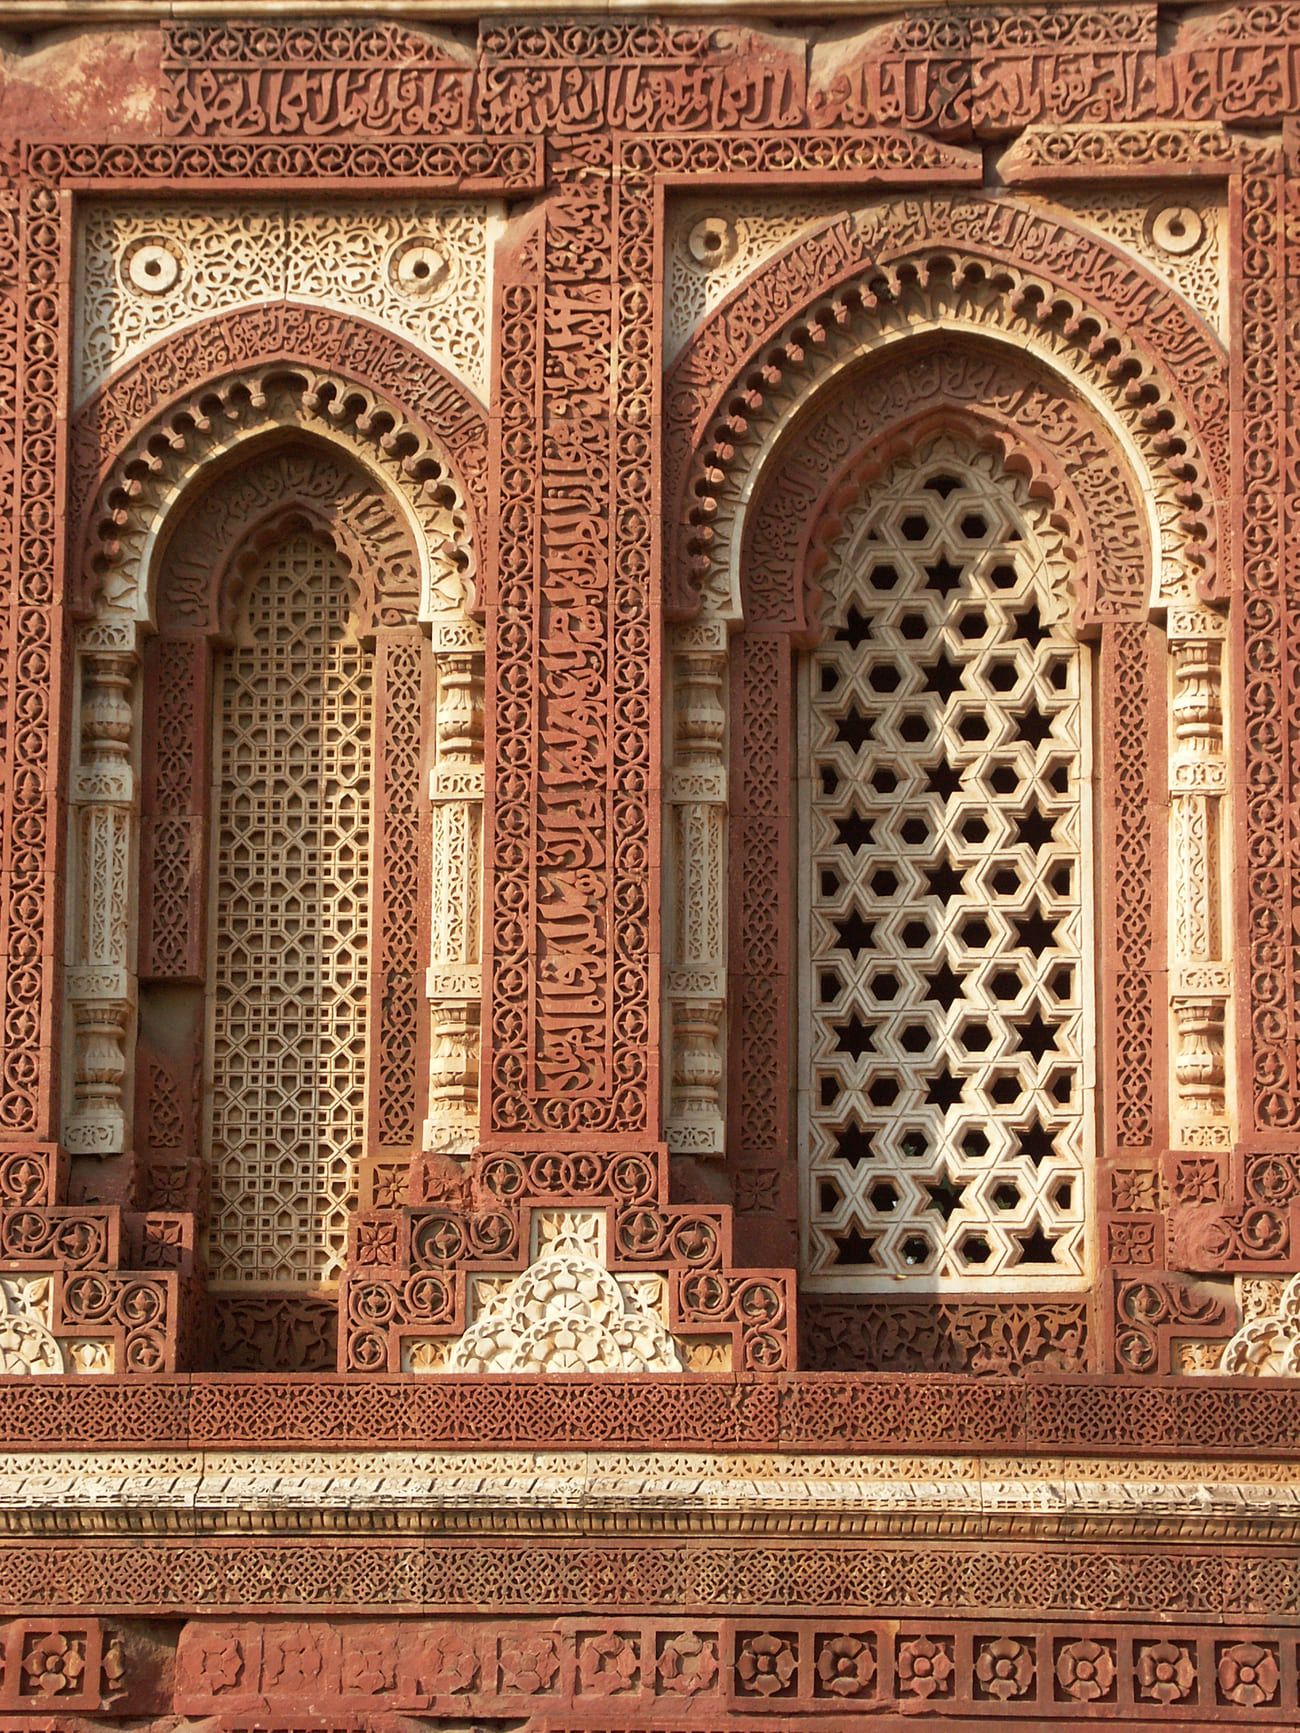 intricate carvings on marble and on red sandstone, inscriptions on the wall of a mosque in the qutab minar